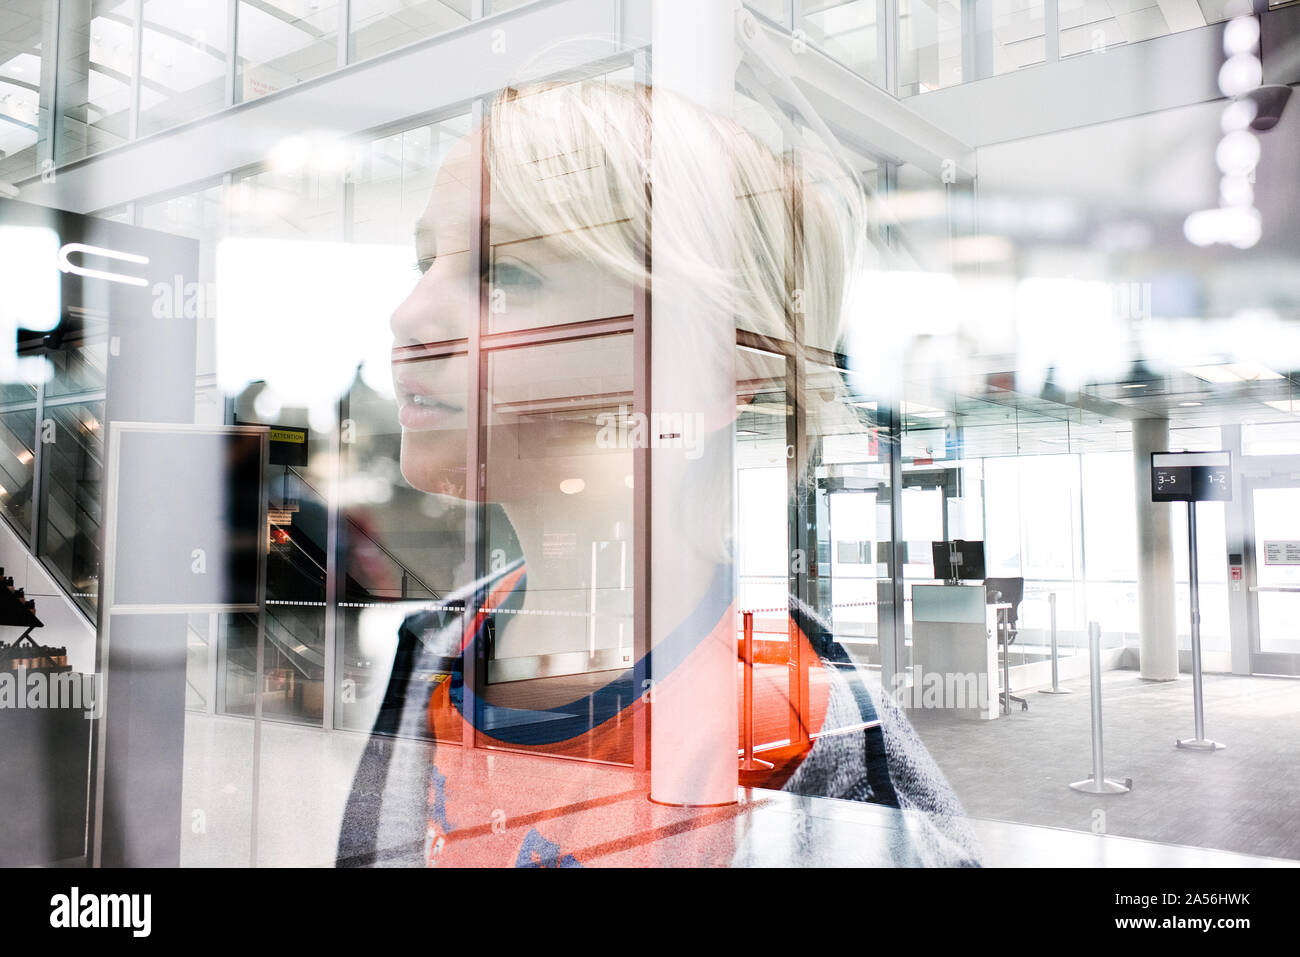 Blond haired boy gazing through window in airport, head and shoulders Stock Photo